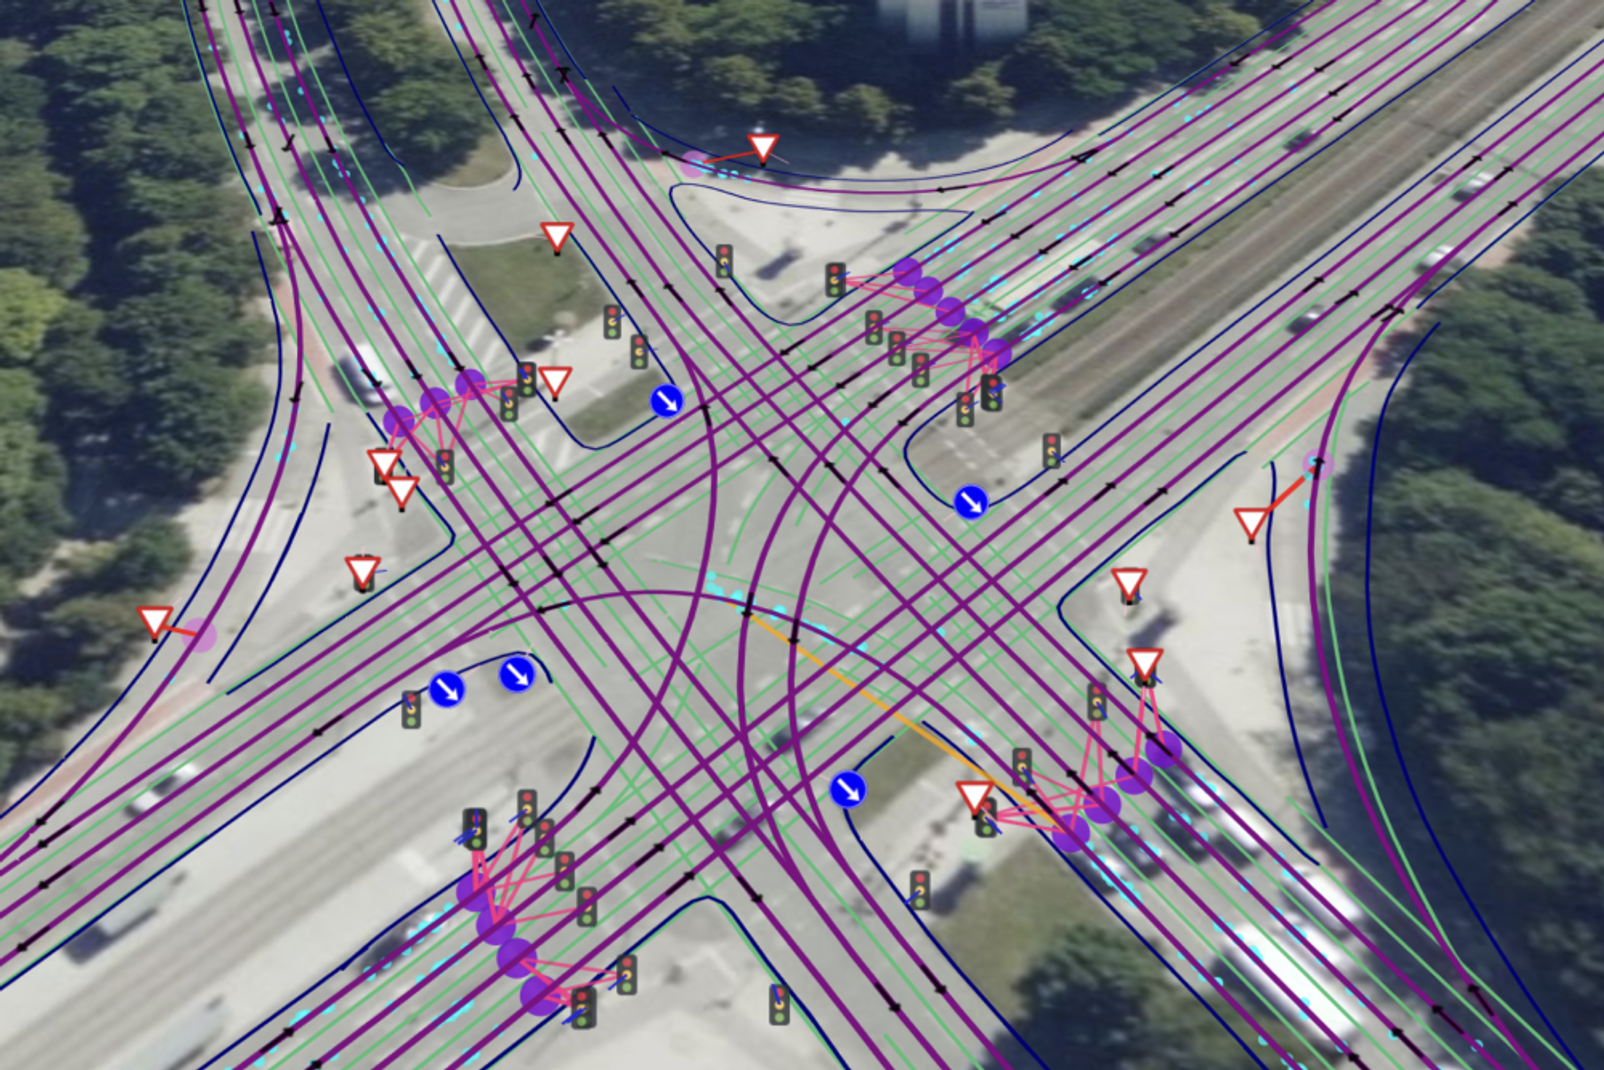 Mobileye’s REM crowdsourced mapping technology gathers a wealth of important information on the driving environment, including traffic signs and signals and their relevance to each lane.